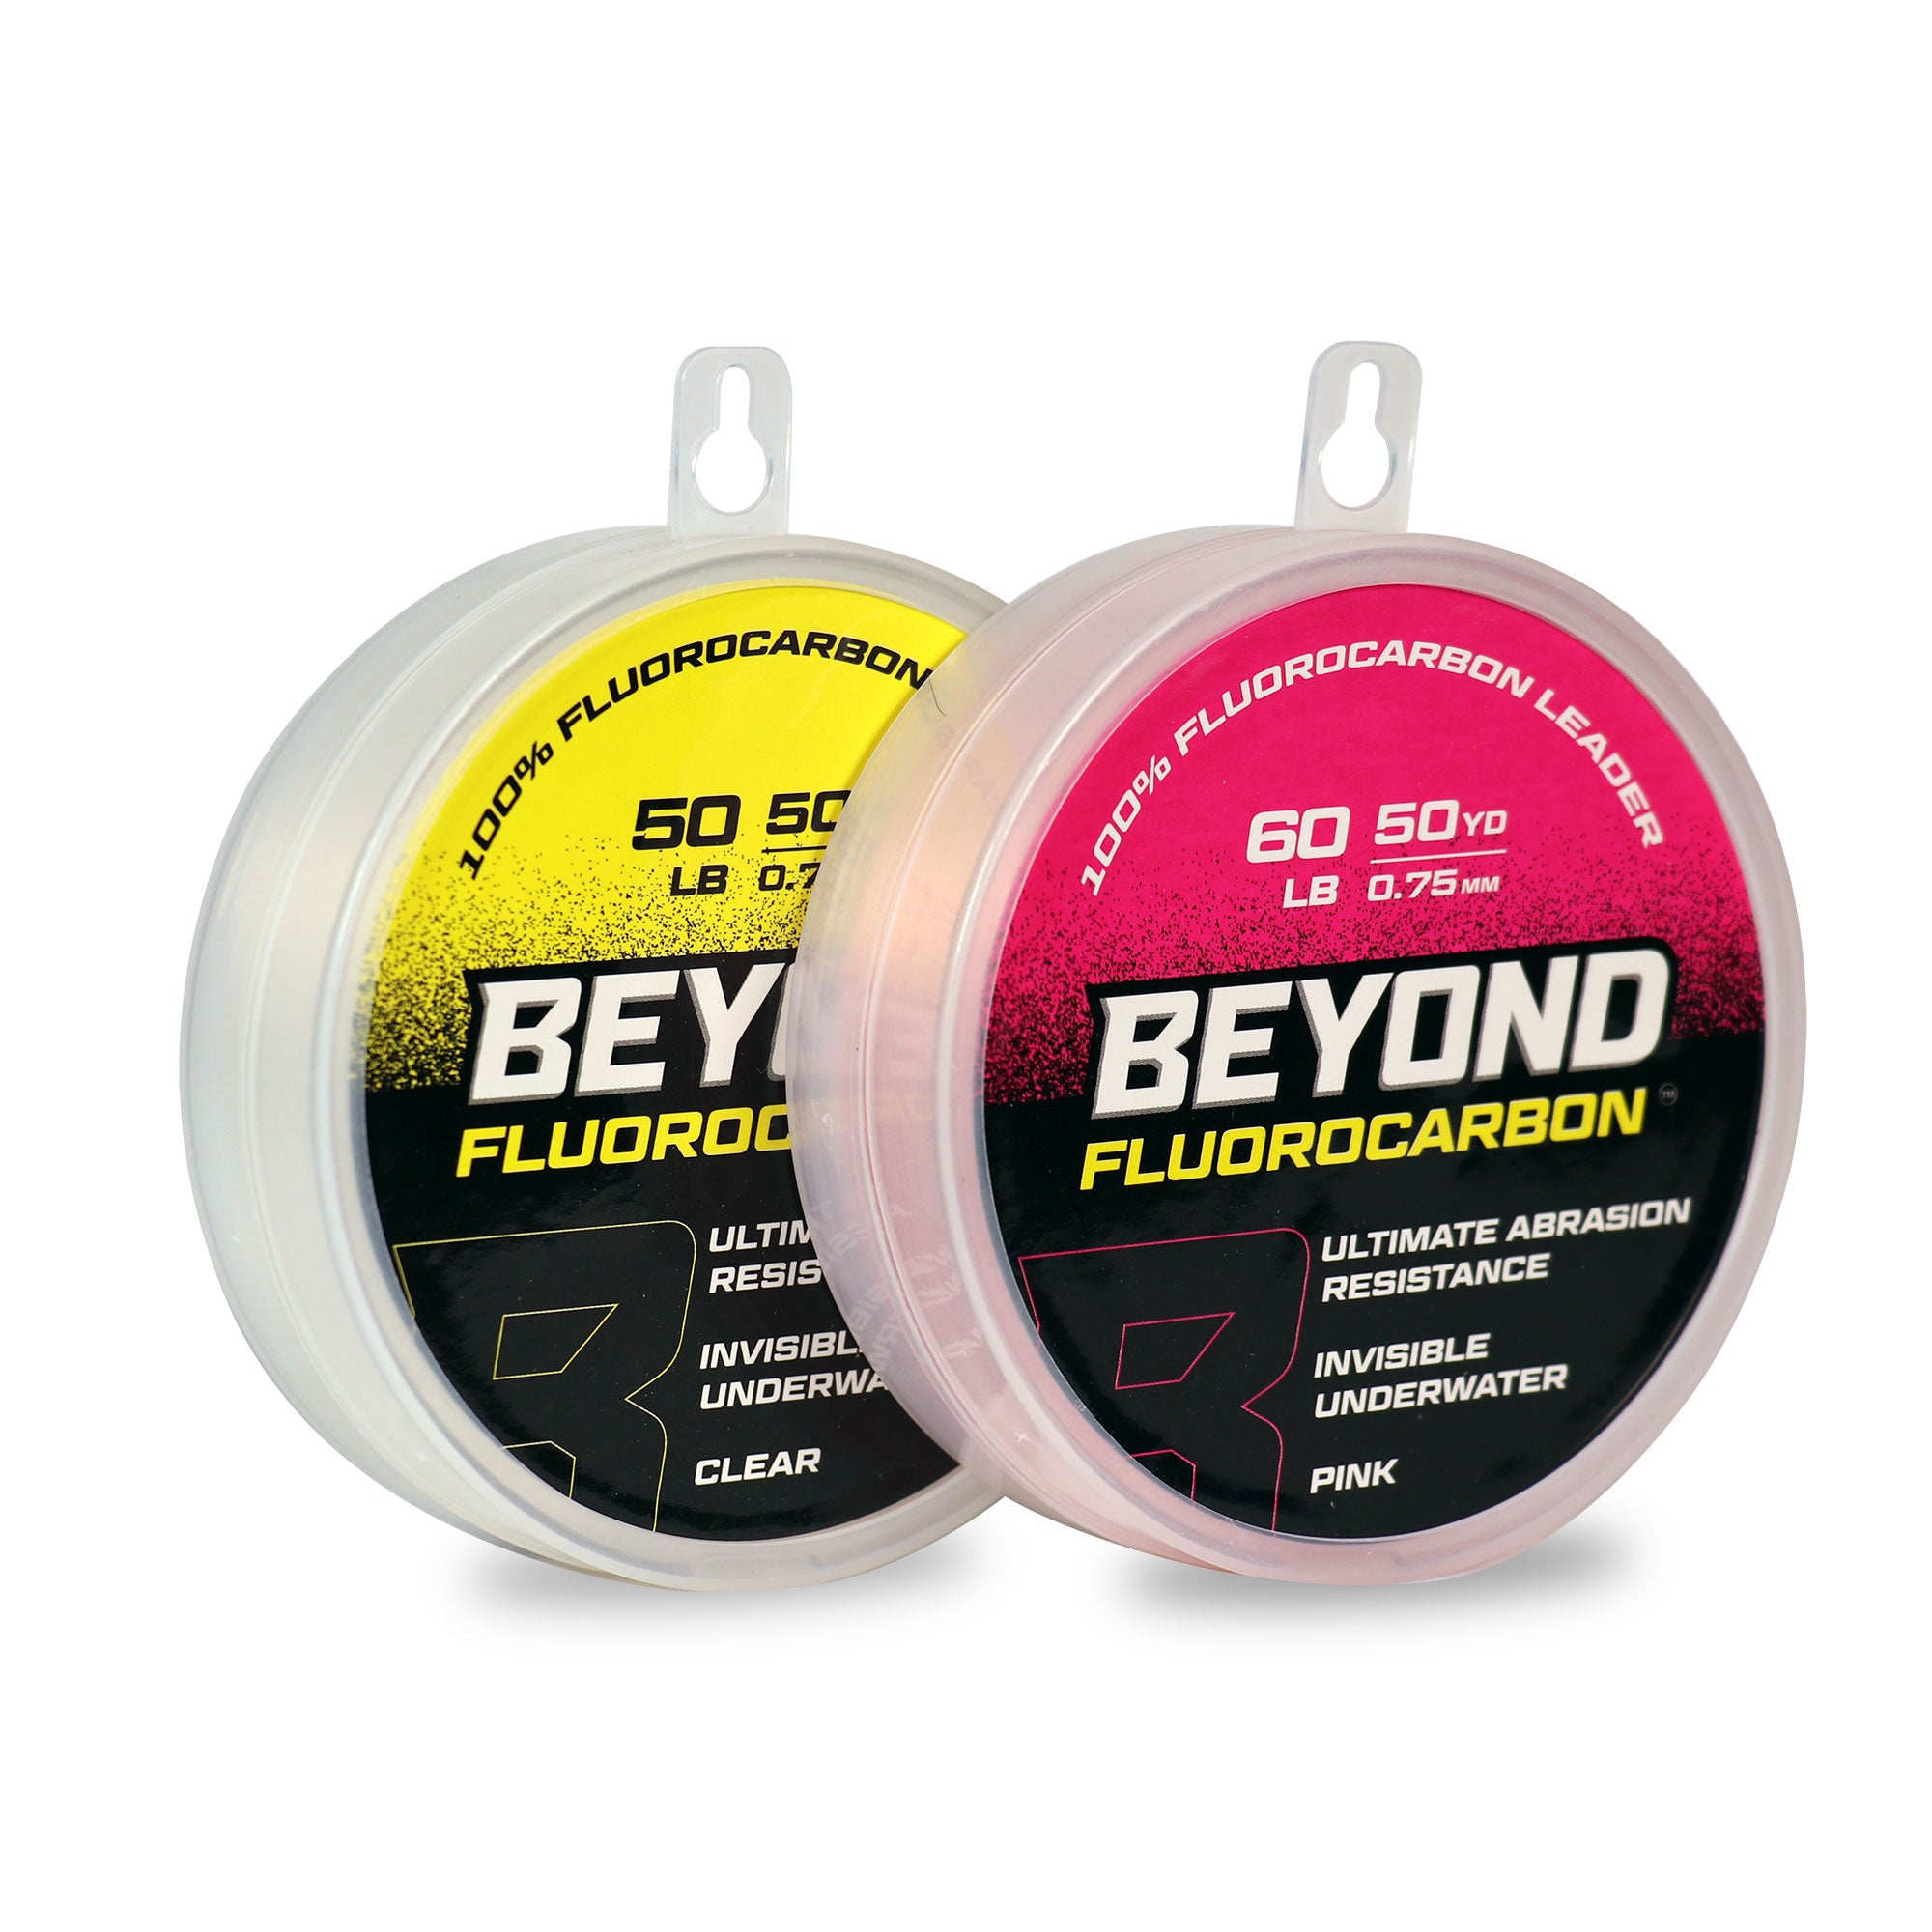 Beyond Fluorocarbon Leader Material - Clear - 40 lb. Test